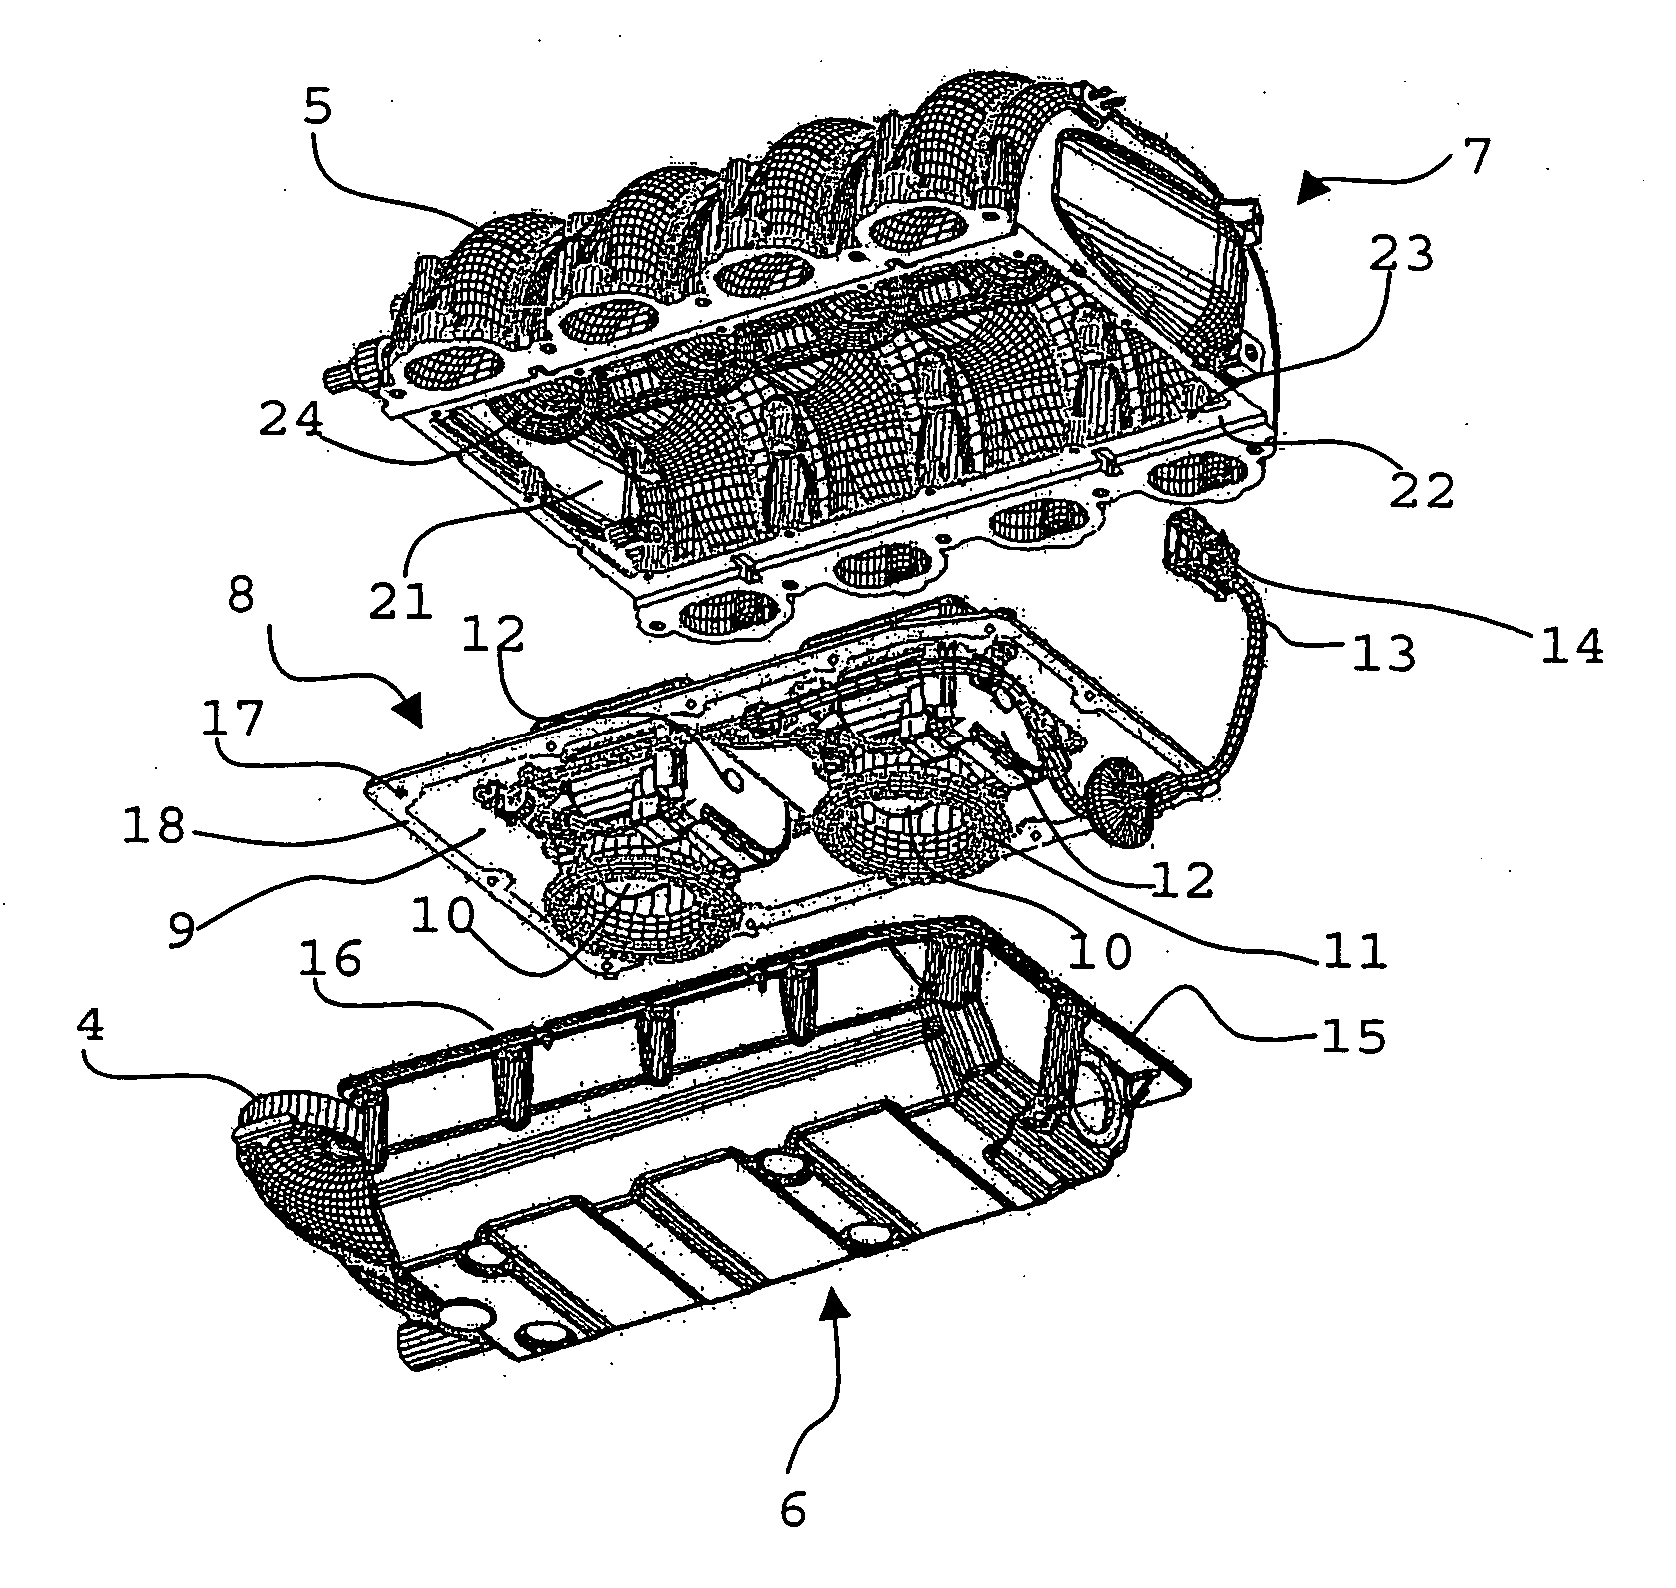 Intake module for an internal combustion engine